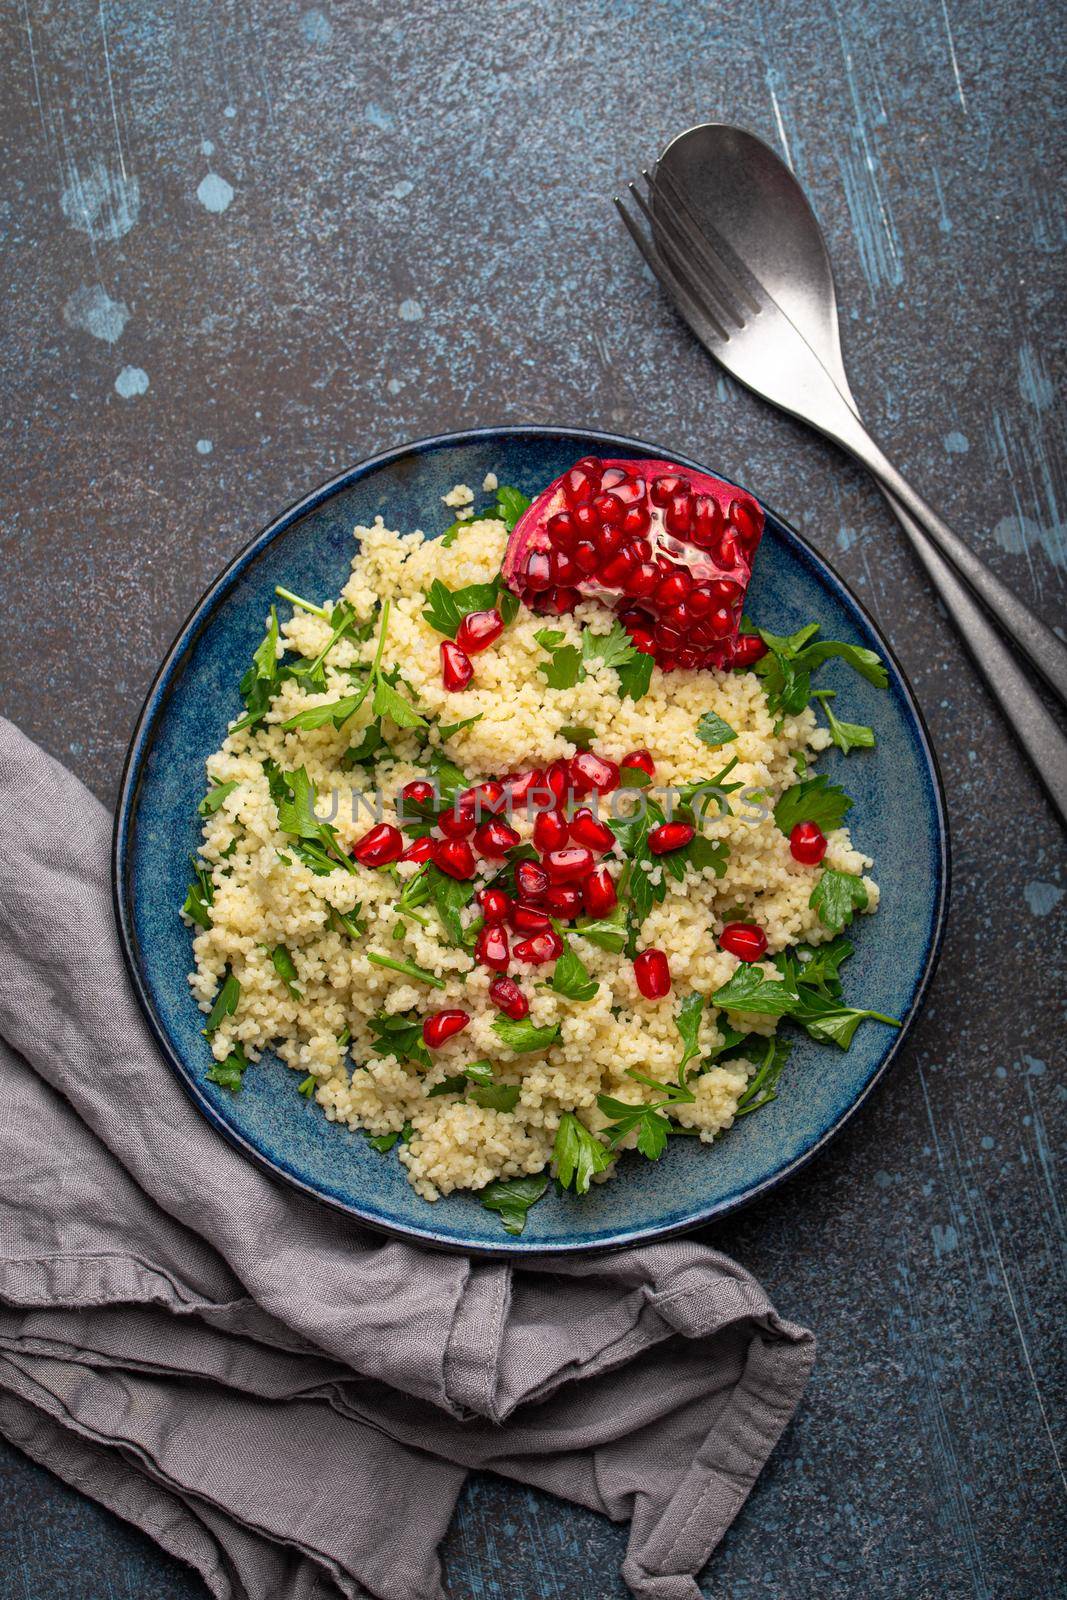 Tabbouleh salad with couscous and pomegranate by its_al_dente